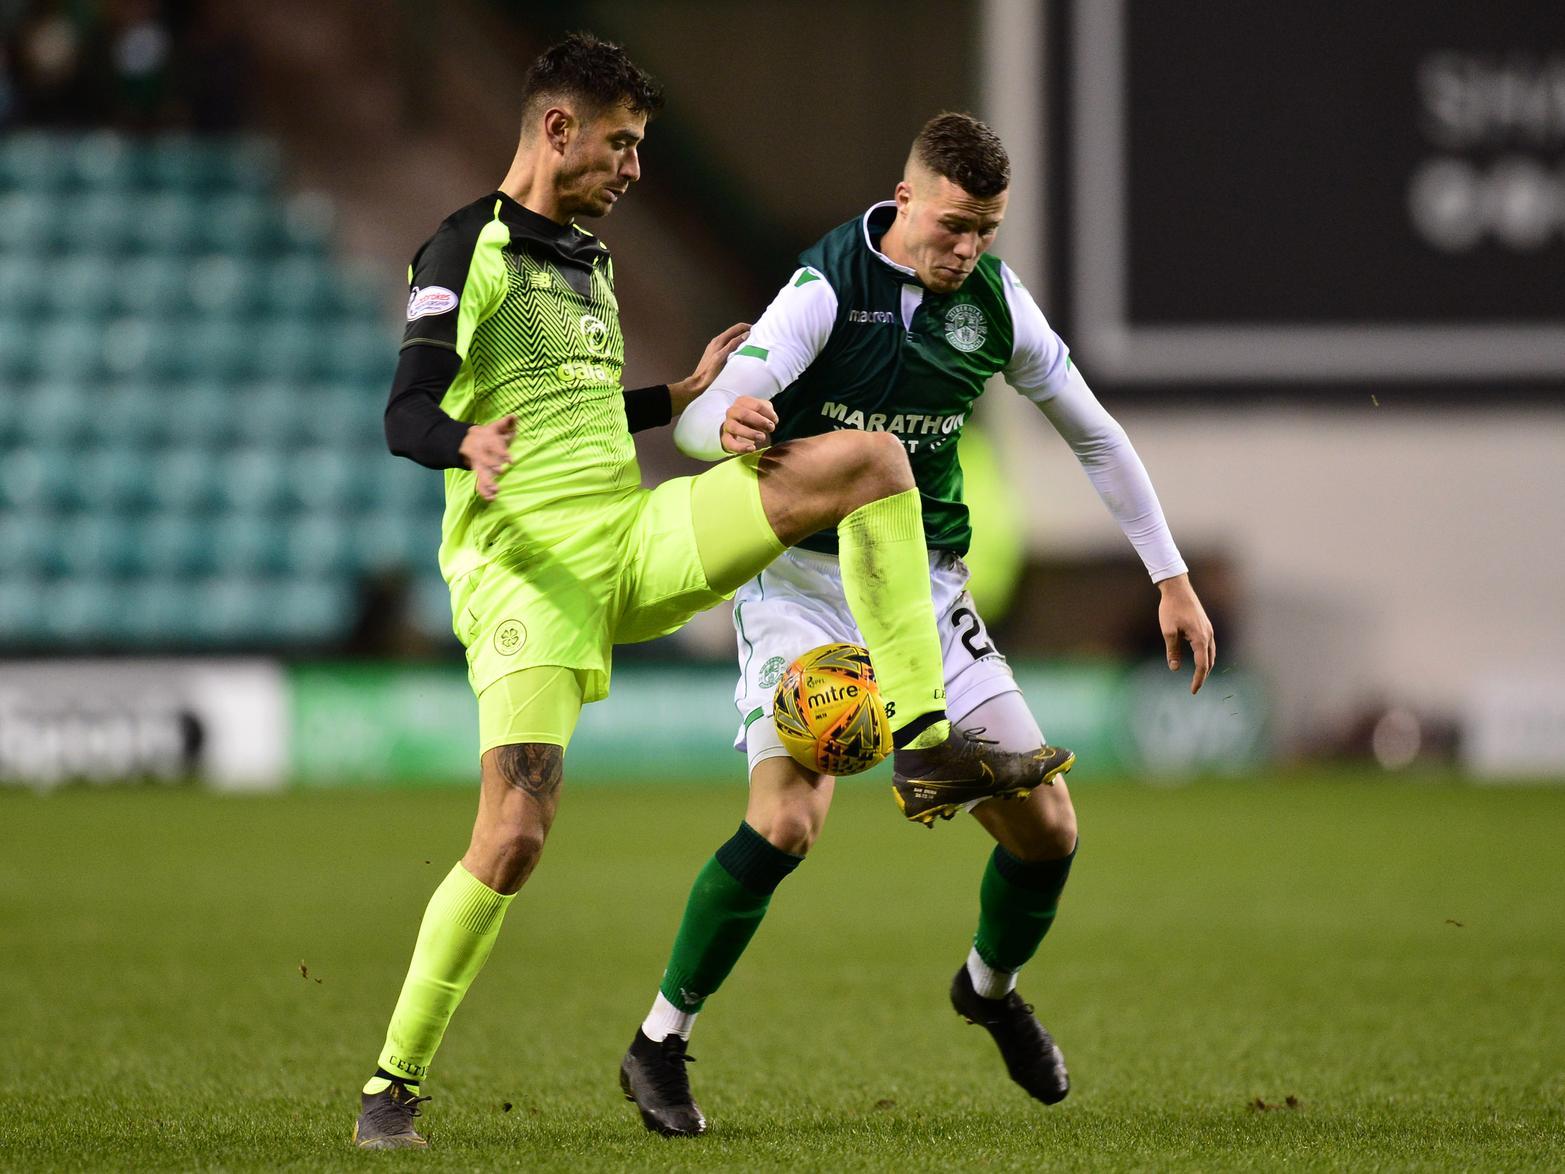 Celtic plan talks with Israel midfielder Nir Bitton to ensure he does not run down his contract. The 28-year-old has been linked with Burnley. (Glasgow Evening Times)